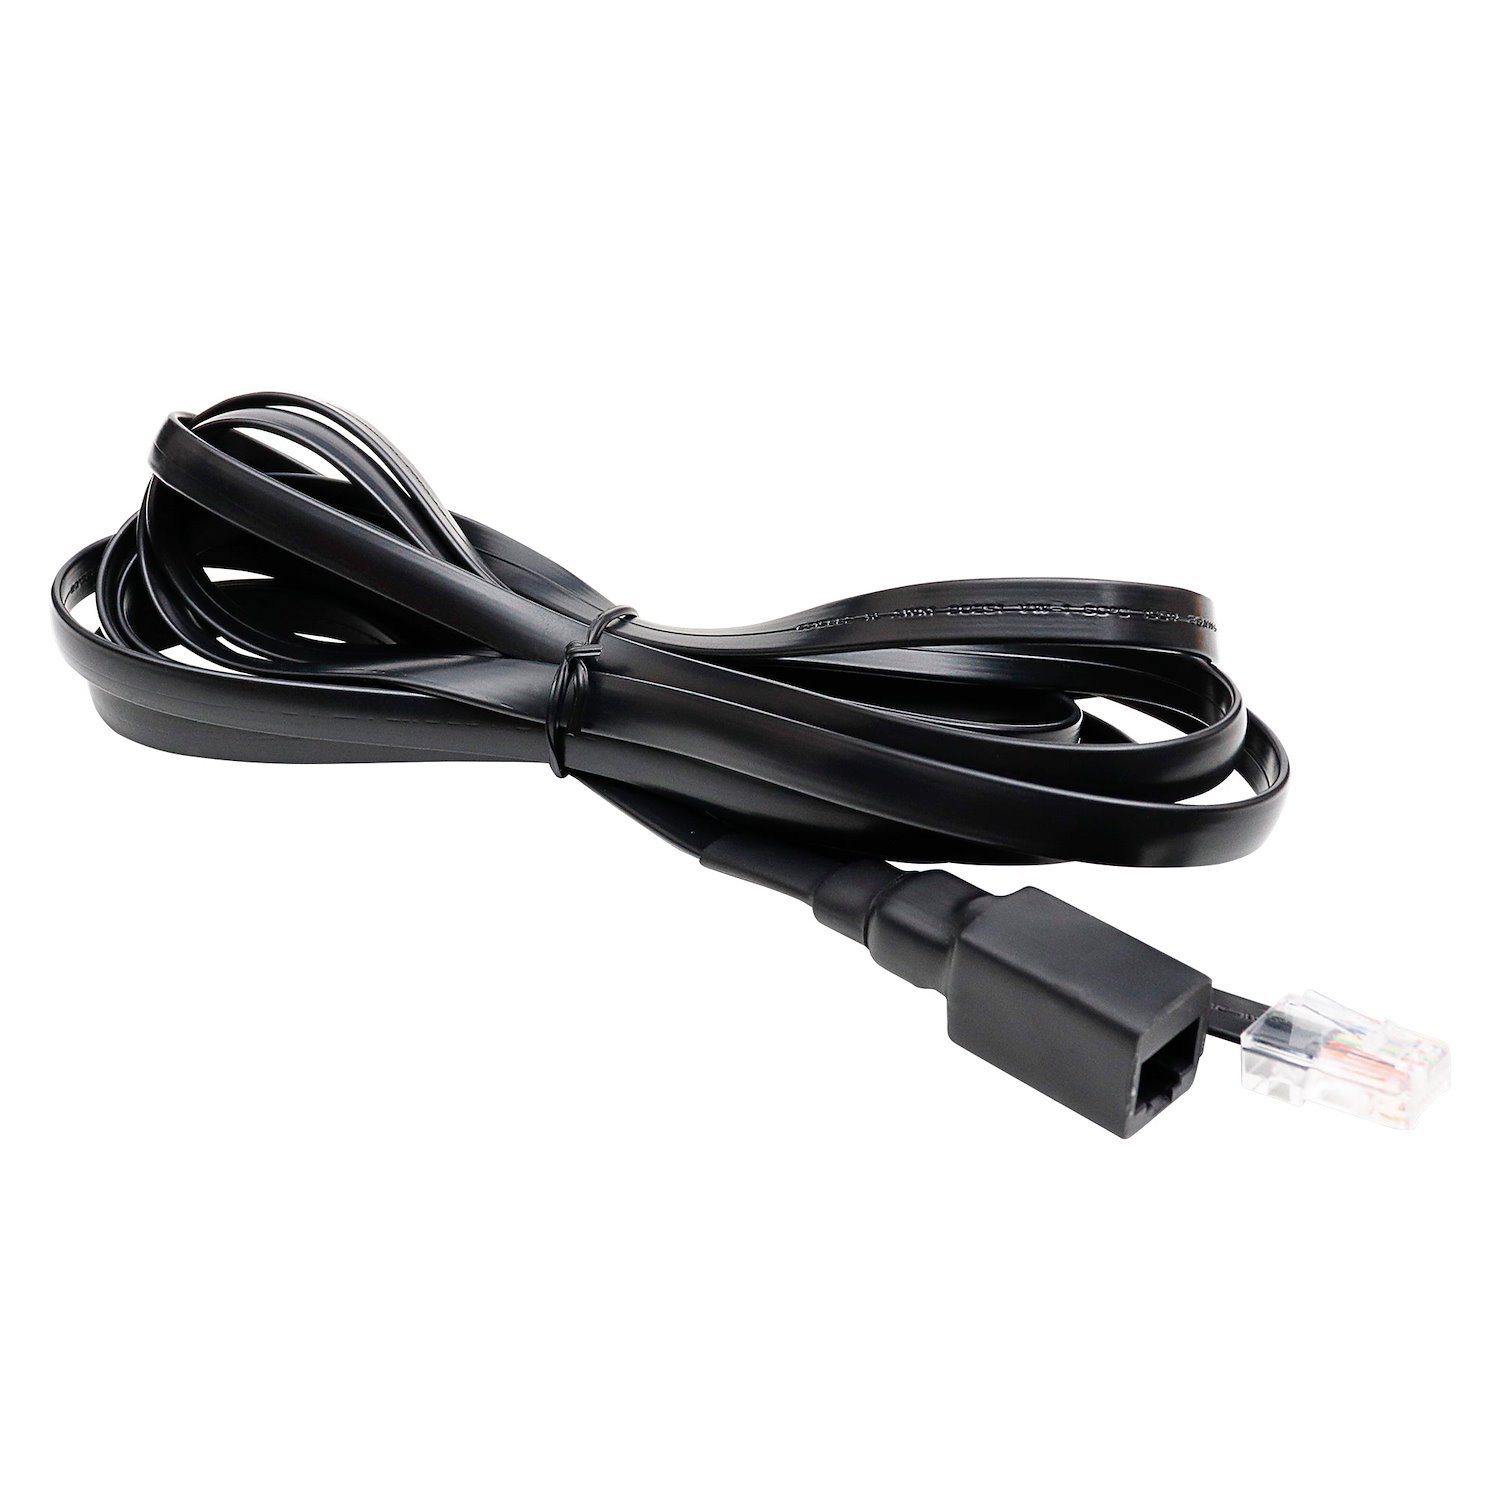 MXTA31 MicroMobile Microphone Extension Cable